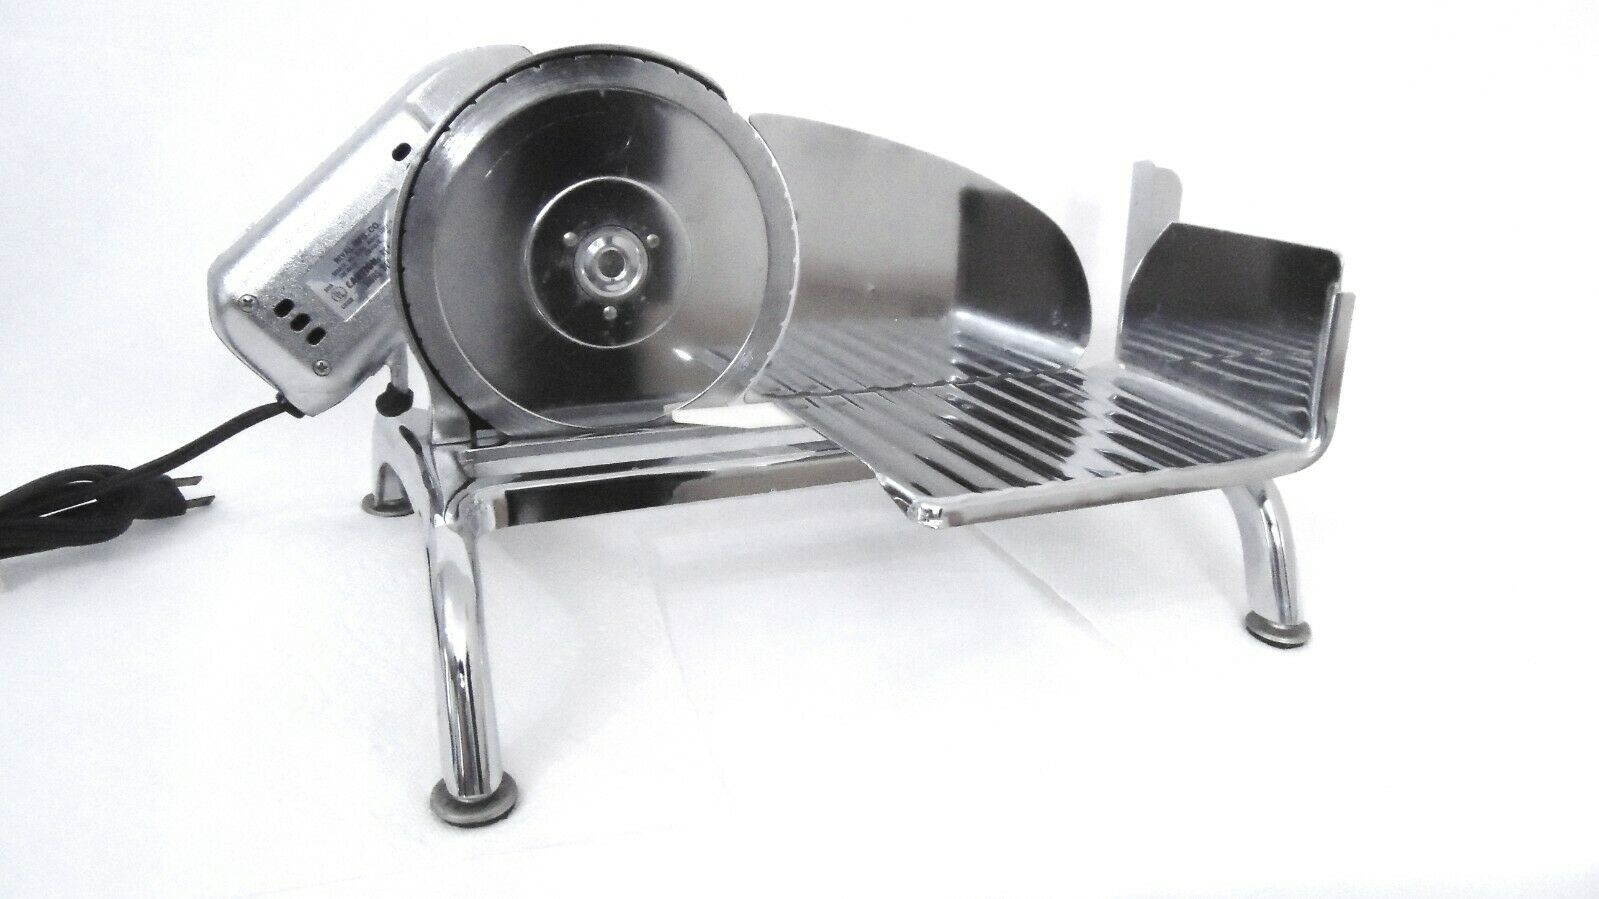 bread and meat slicer